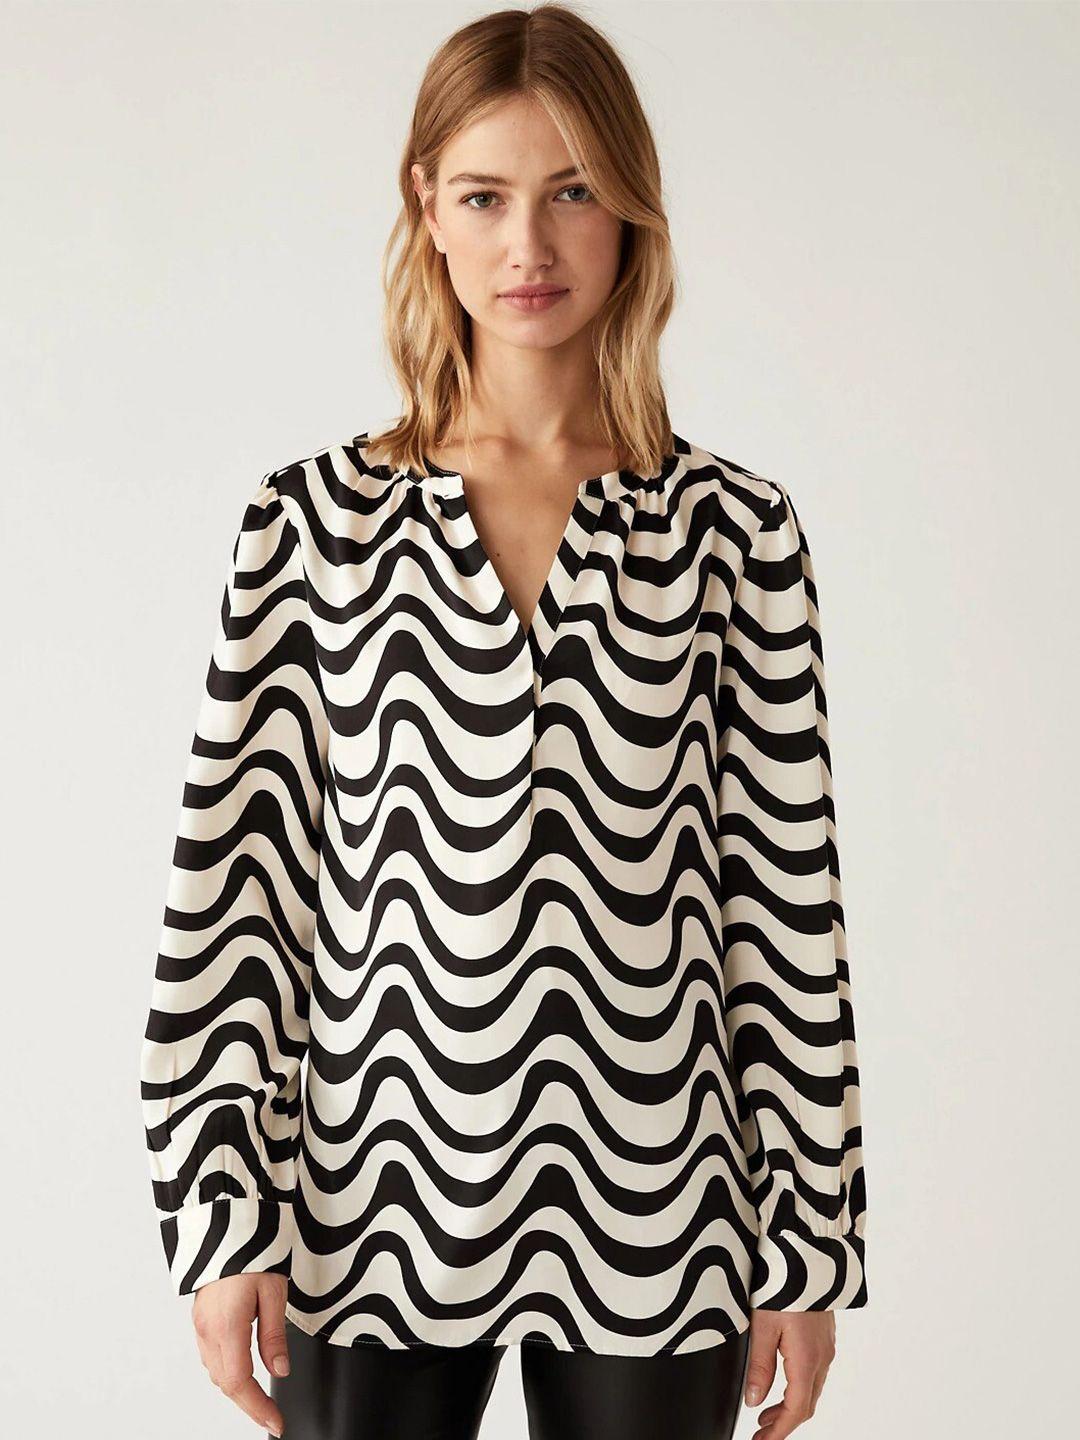 marks & spencer abstract printed shirt style regular top